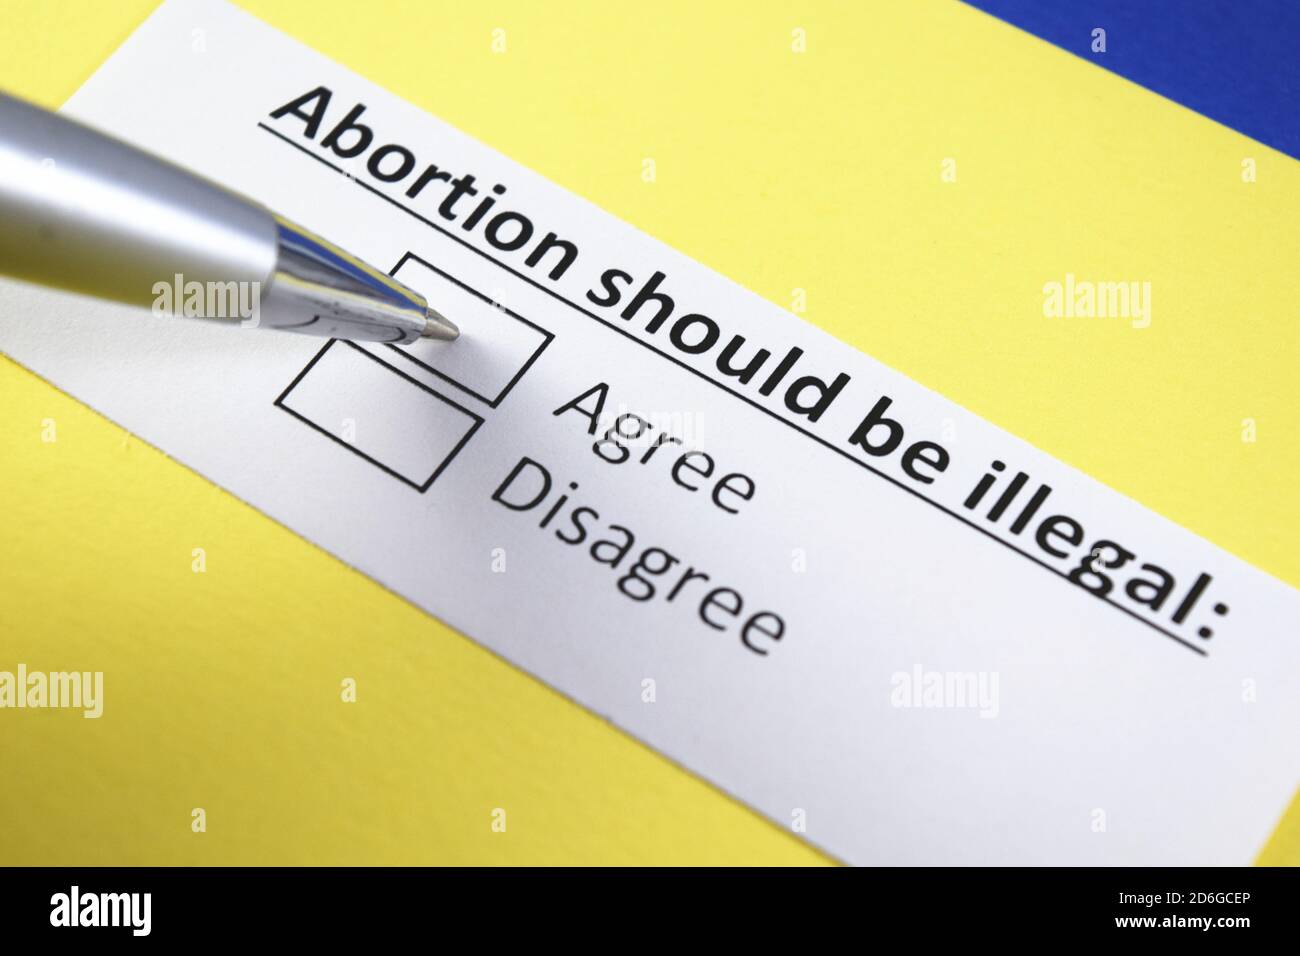 Abortion should be illegal: Agree or disagree? Stock Photo